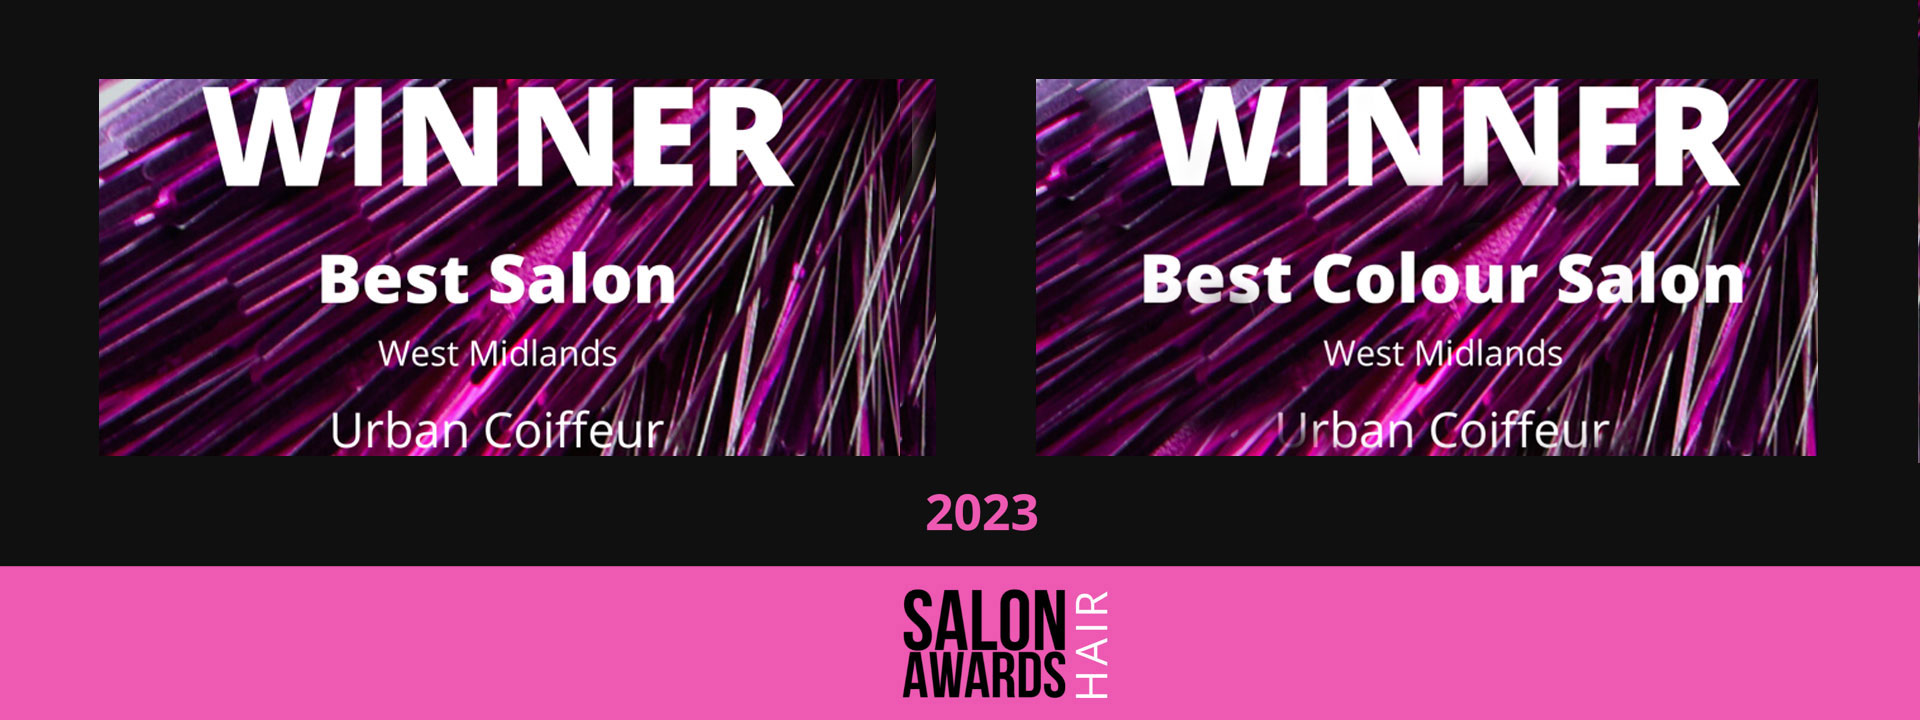 Urban Coiffeur Have Proudly Been Awarded The Title Of "Best Colour Salon in the West Midlands and Best Salon in the West Midlands.